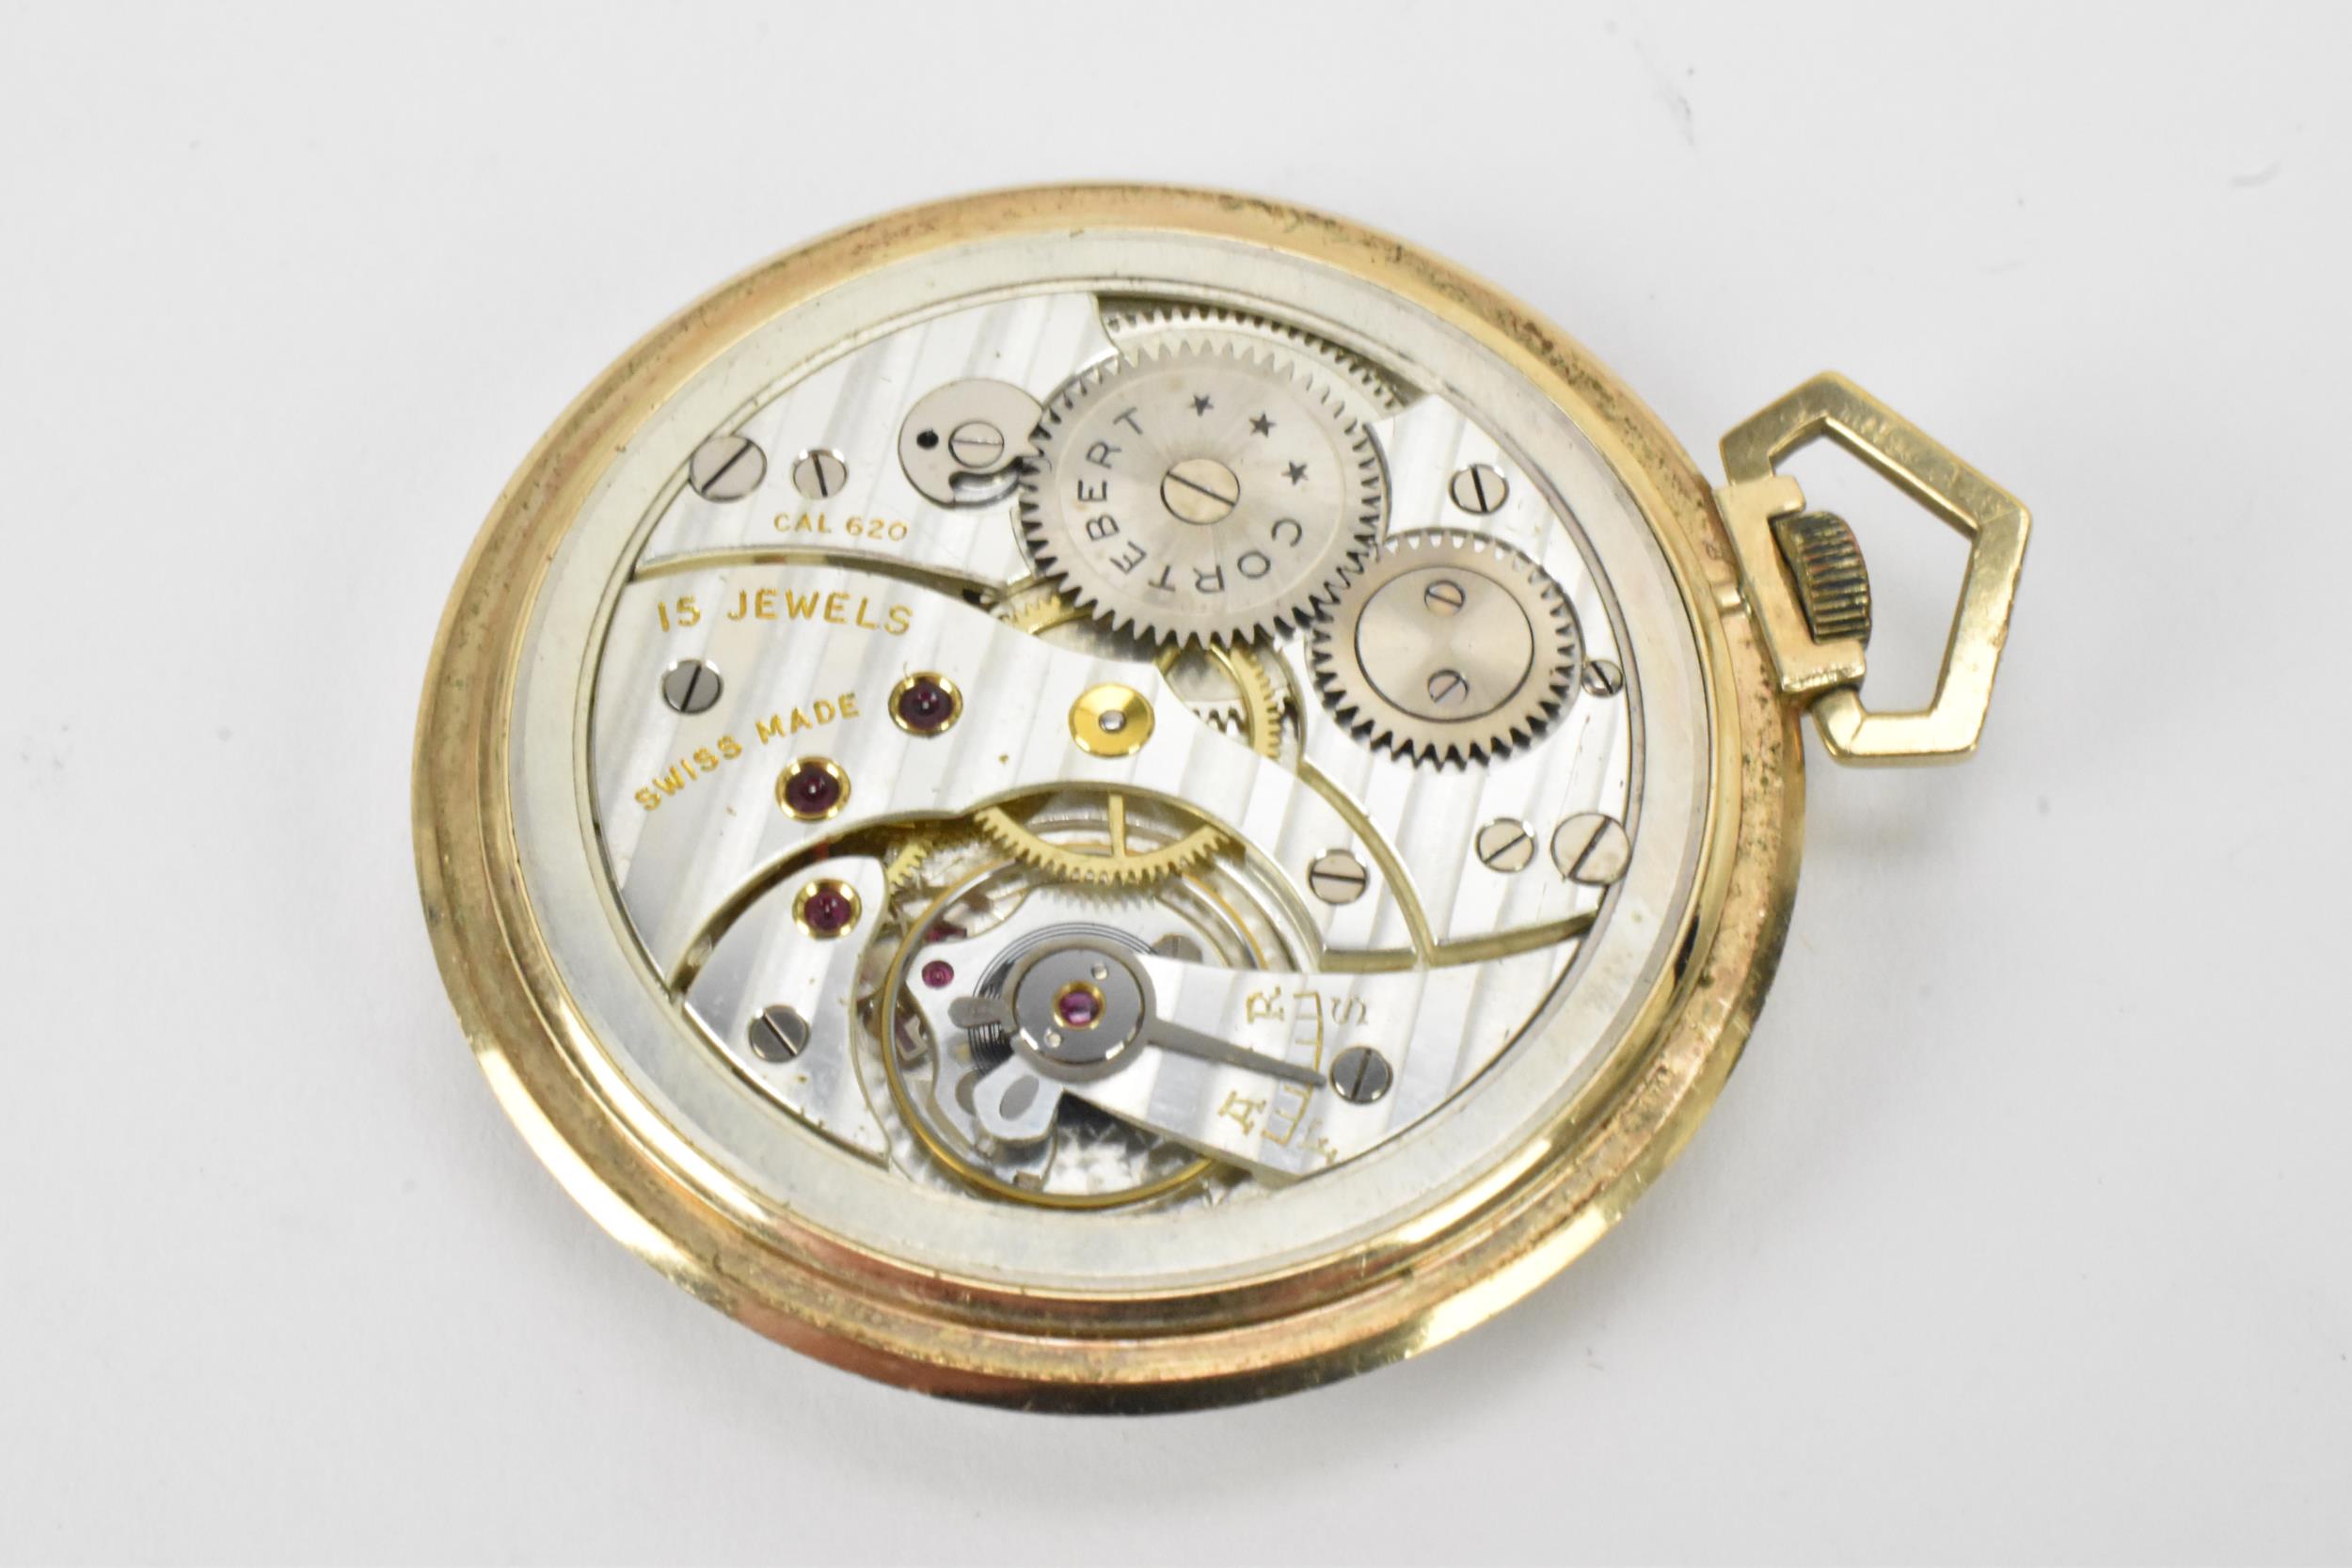 A Cortebert 1930s, 9ct gold, open faced pocket watch - Image 5 of 5